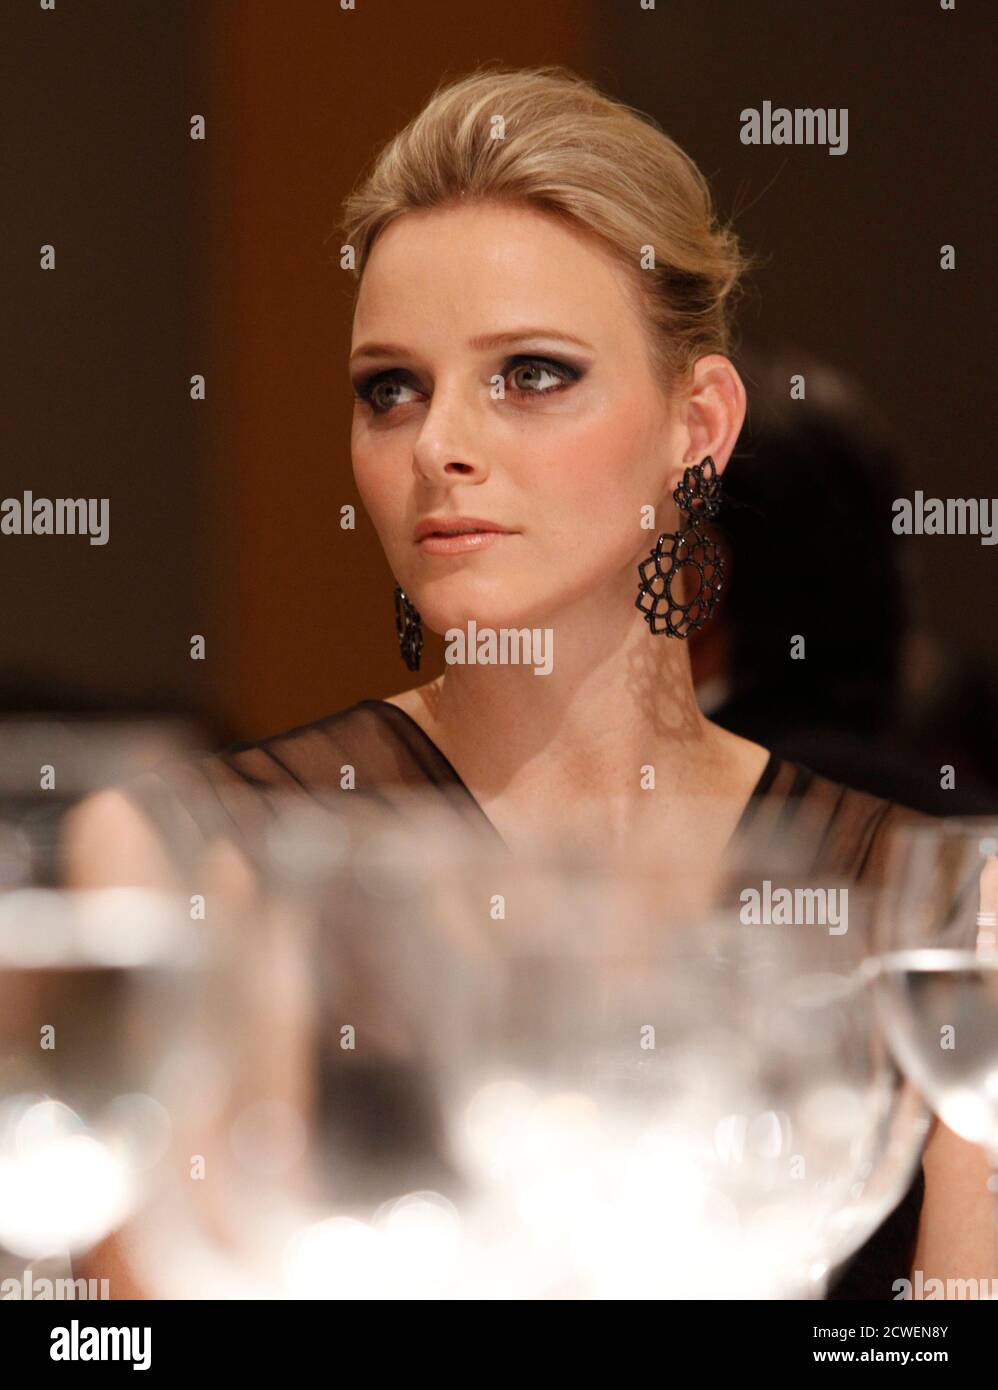 Prince Albert II of Monaco's fiancee Charlene Wittstock attends at a gala dinner hosted by BirdLife International in Tokyo October 29, 2010. REUTERS/Issei Kato (JAPAN - Tags: ROYALS SOCIETY) Stock Photo